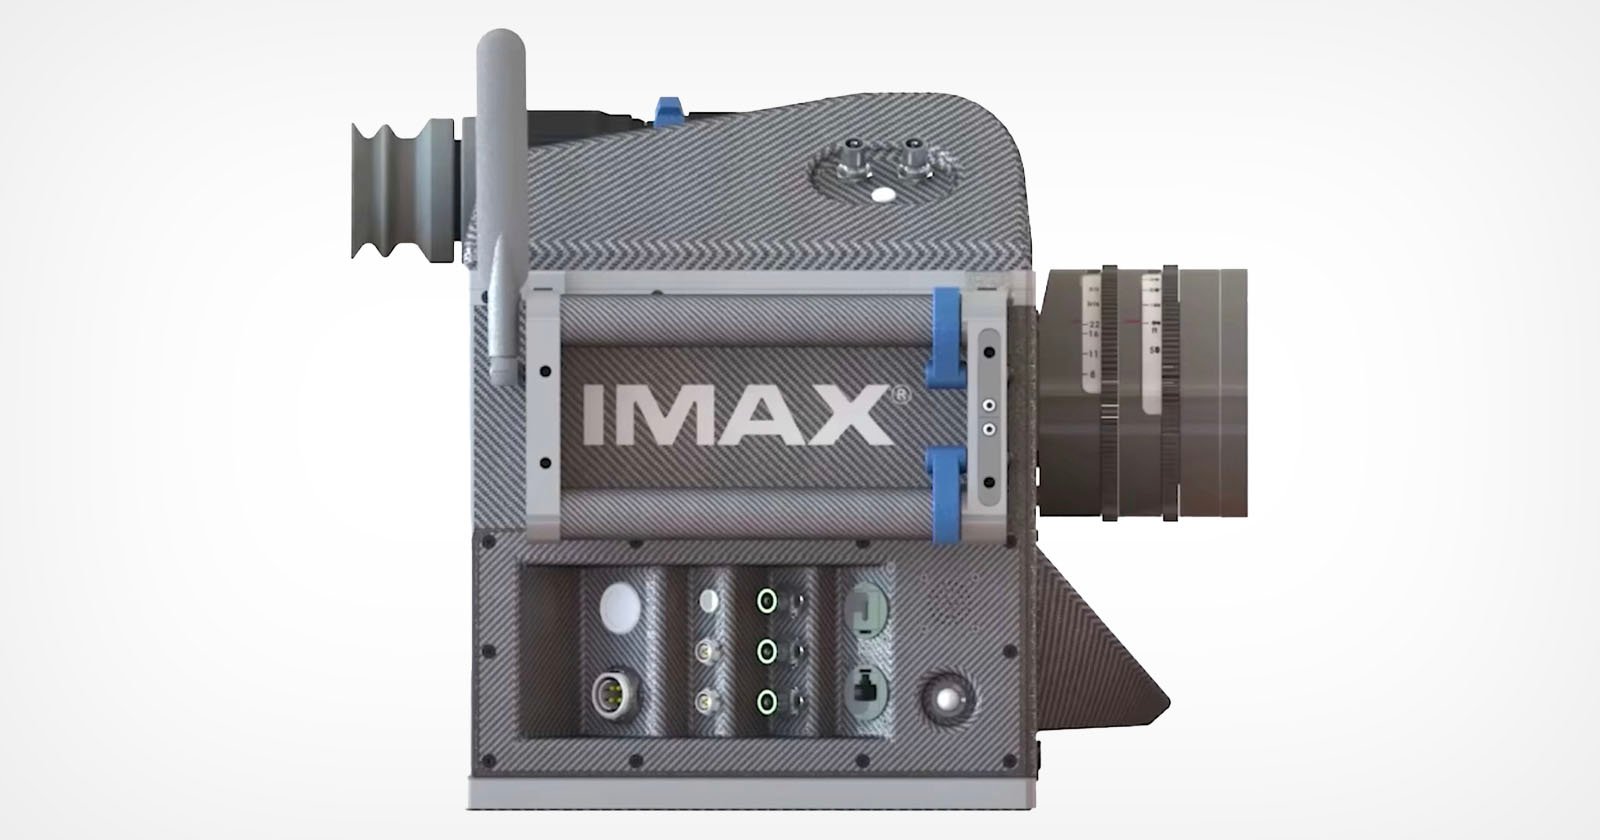 A digital render of an imax film projector featuring intricate details including reels, lenses, and a max label on a textured gray body.